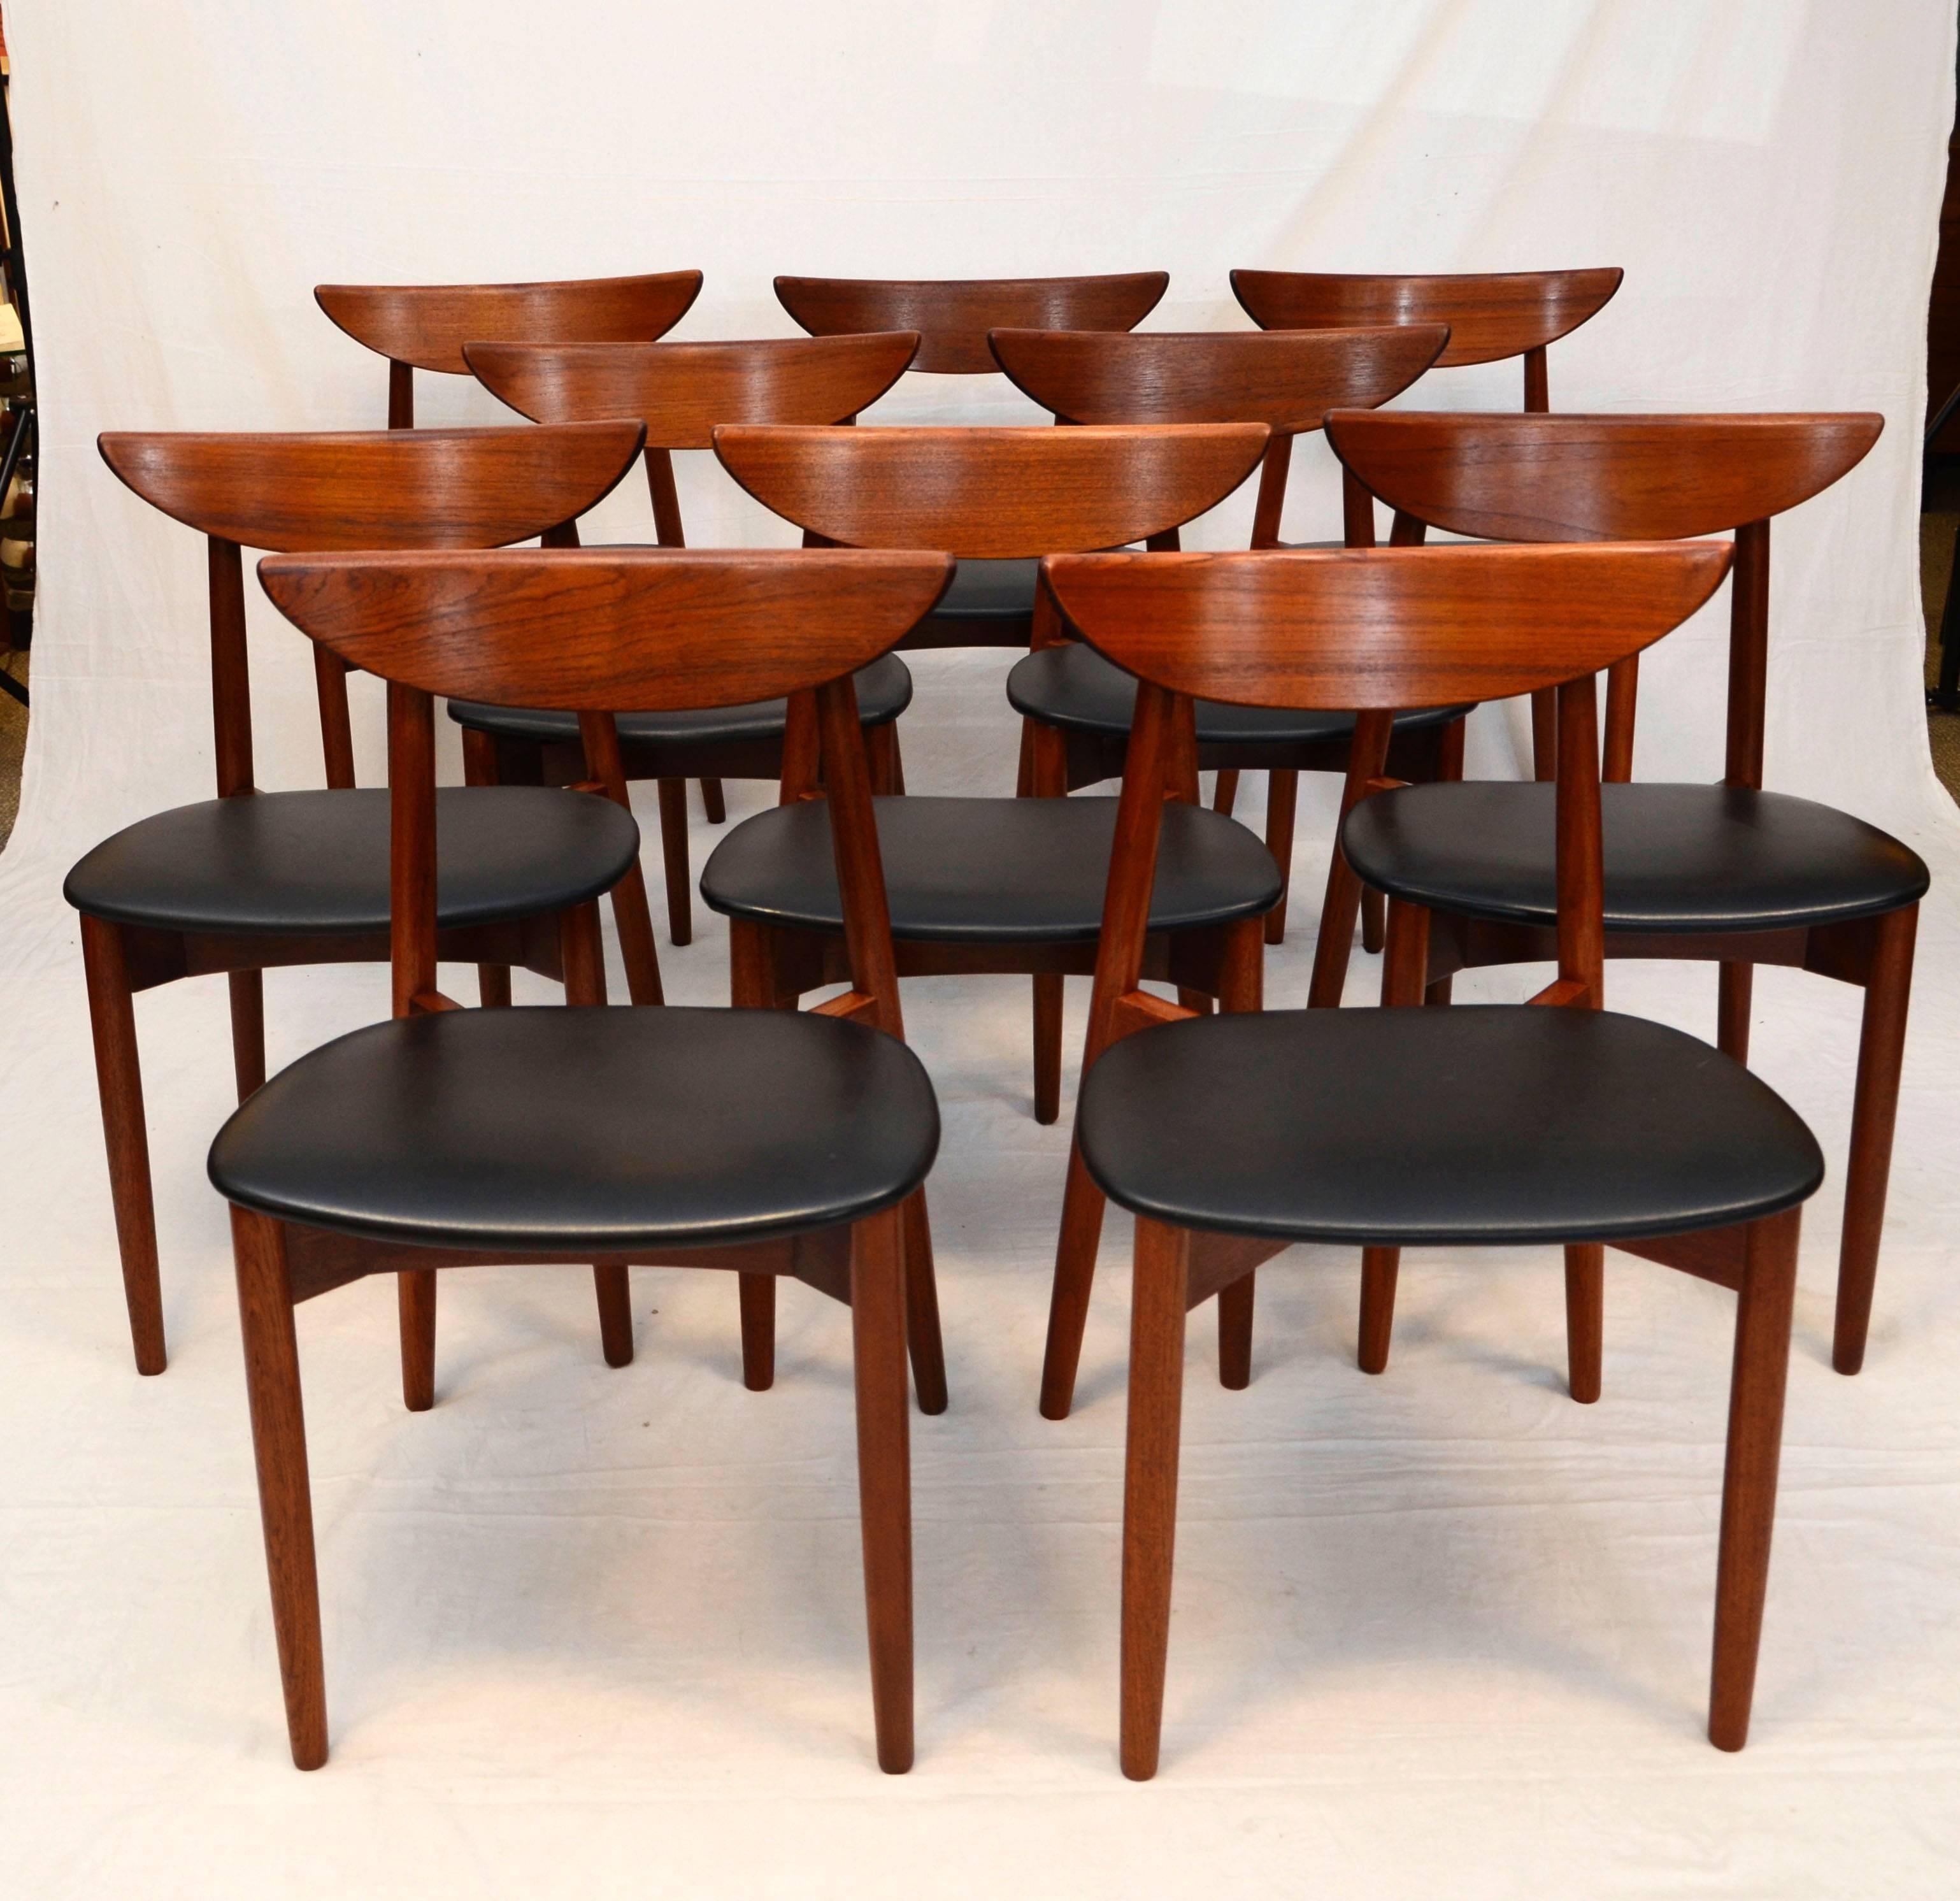 Very stylish set of ten teak dining chairs designed by Harry Ostergaard for Moreddi. Purchased by the previous owner as a set of four and later added six more as a larger table was purchased for a growing family, so the underneath structure on the